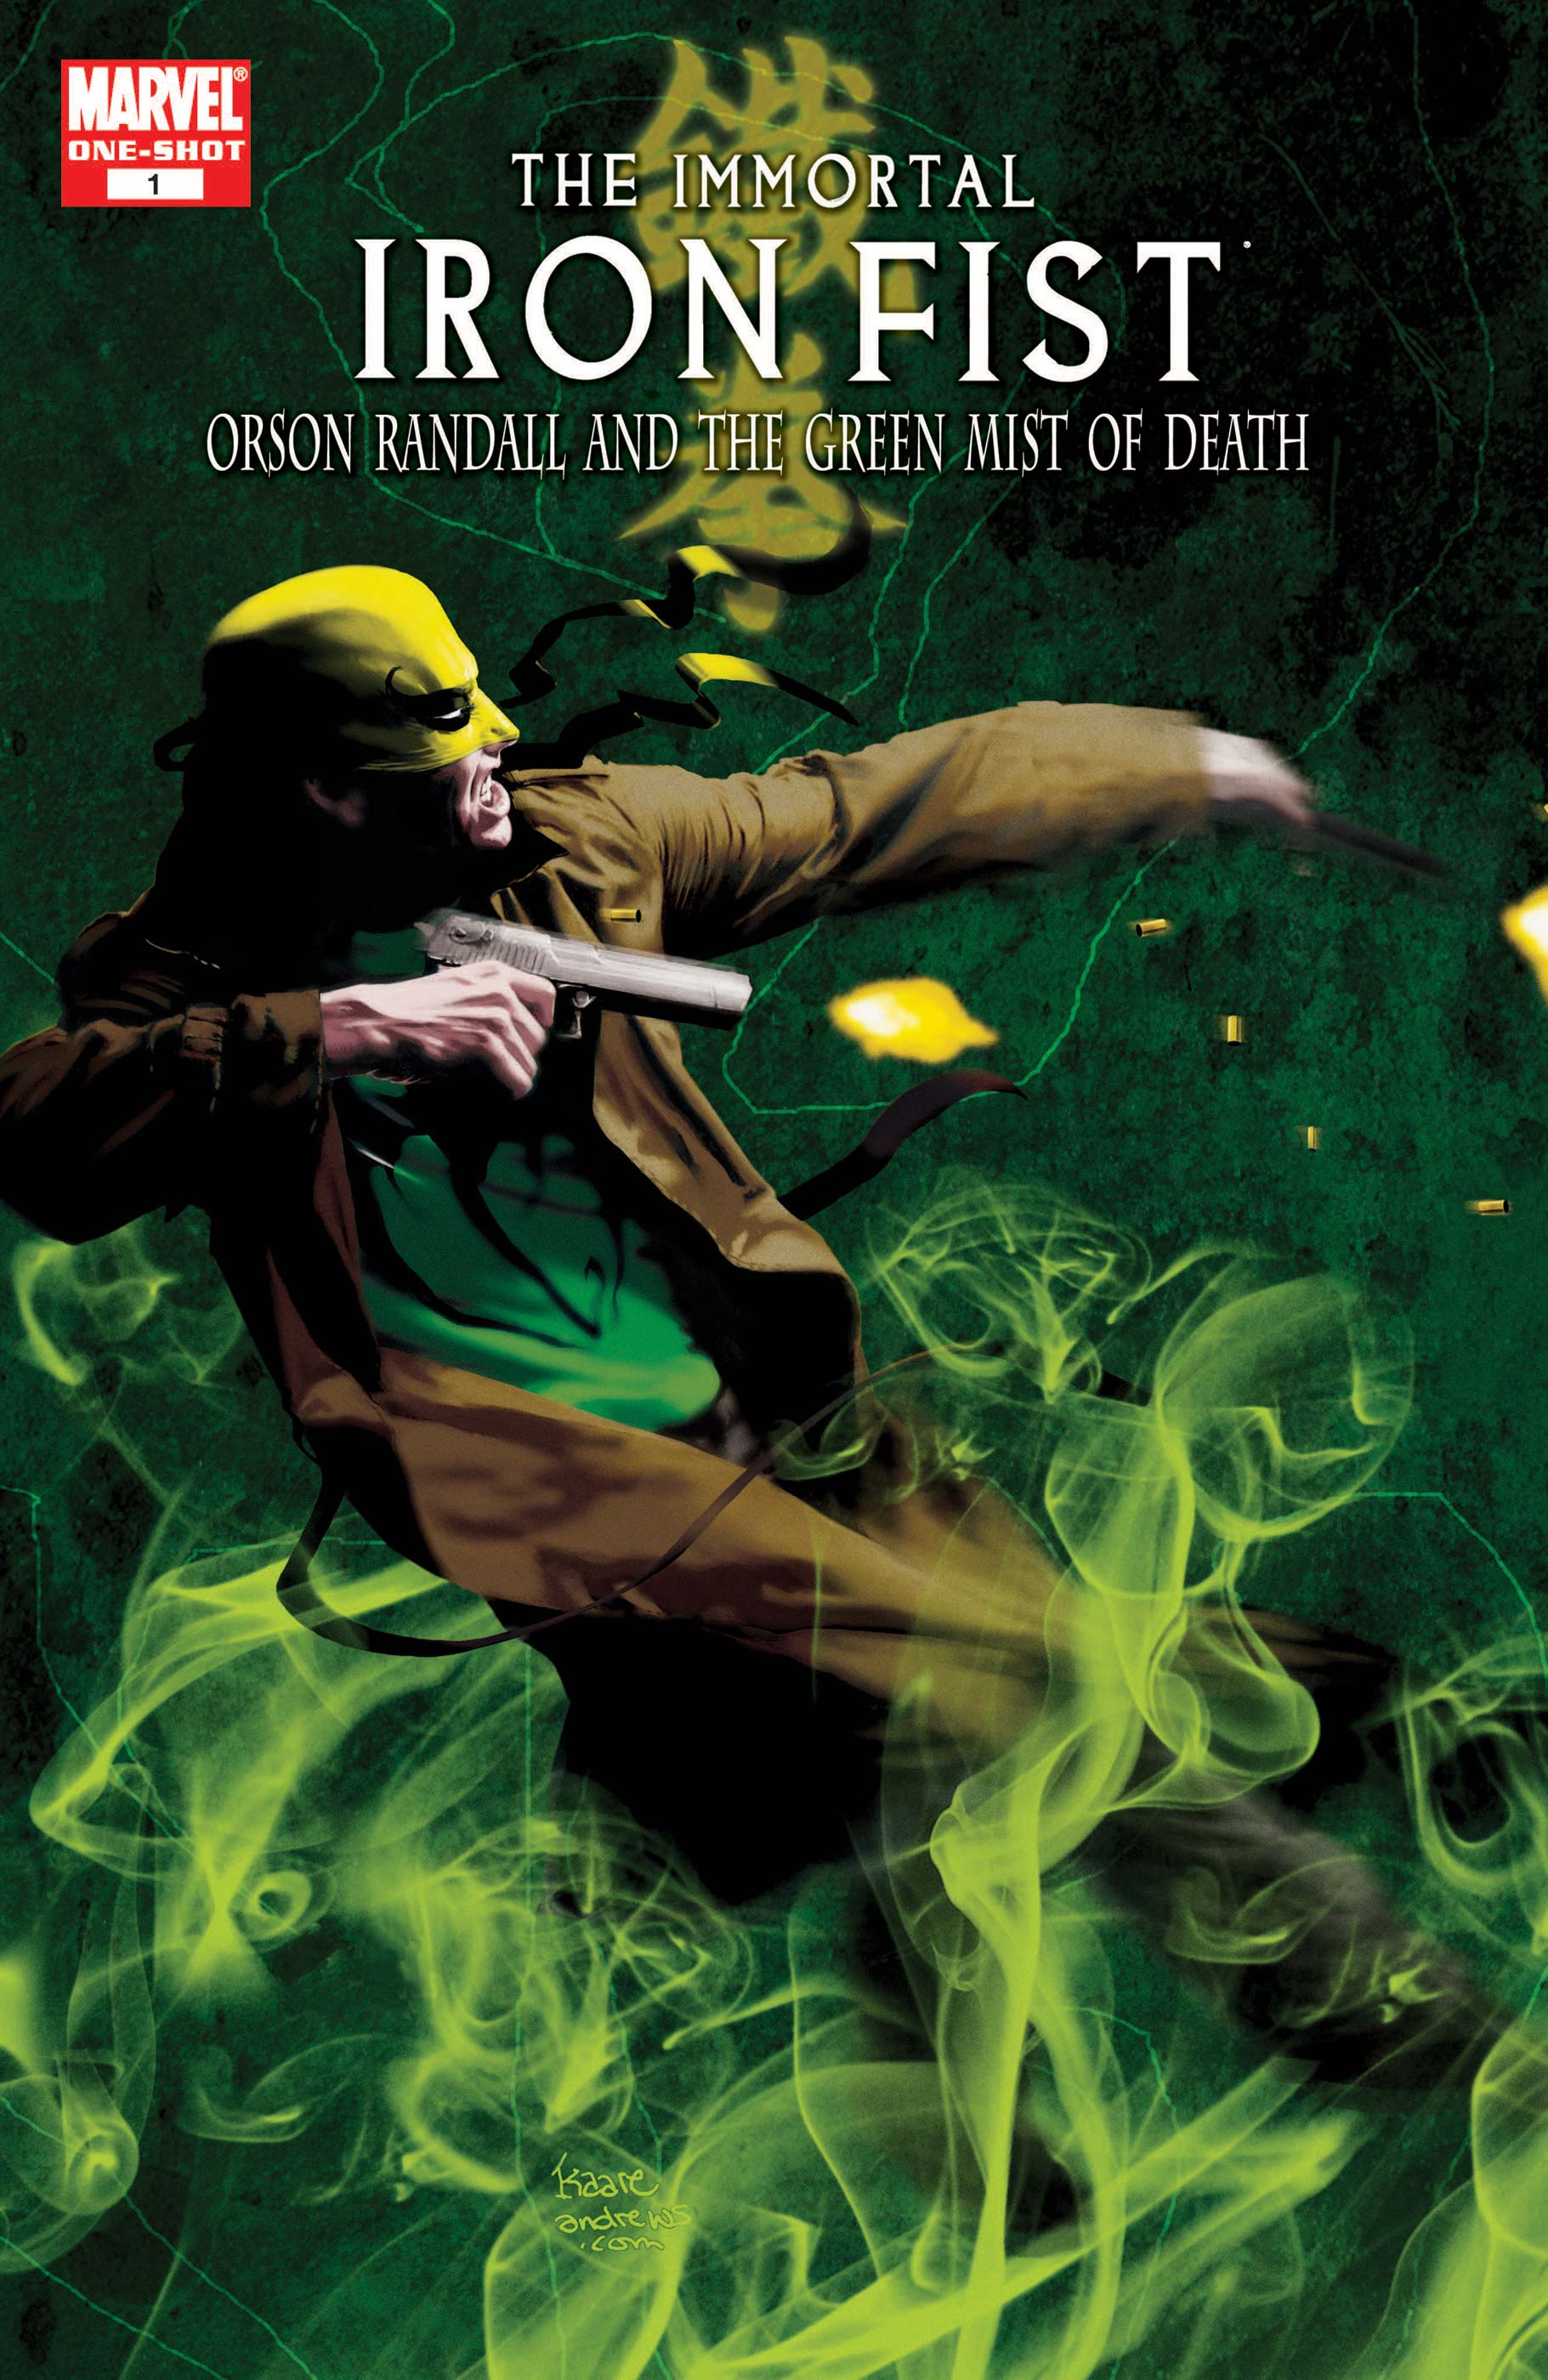 Immortal Iron Fist: Orson Randall and the Green Mist of Death (2008) #1